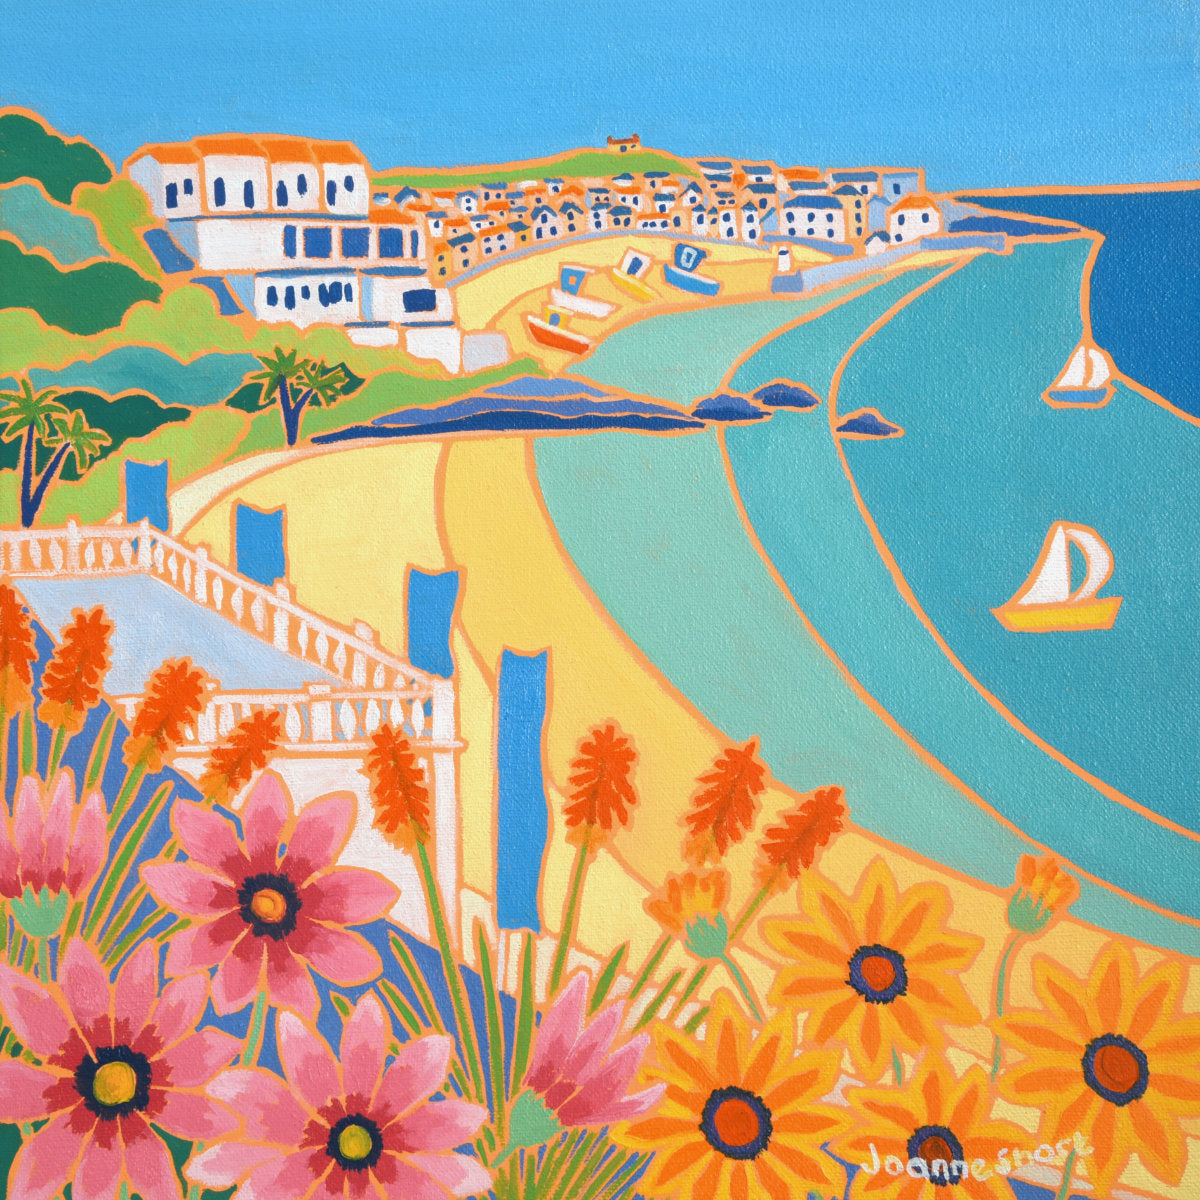 &#39;Flowers and Flags Porthminster Beach St Ives&#39;, 12x12 inches oil on canvas. Painting by Cornish Artist Joanne Short. Cornish Art from our Cornwall Art Gallery